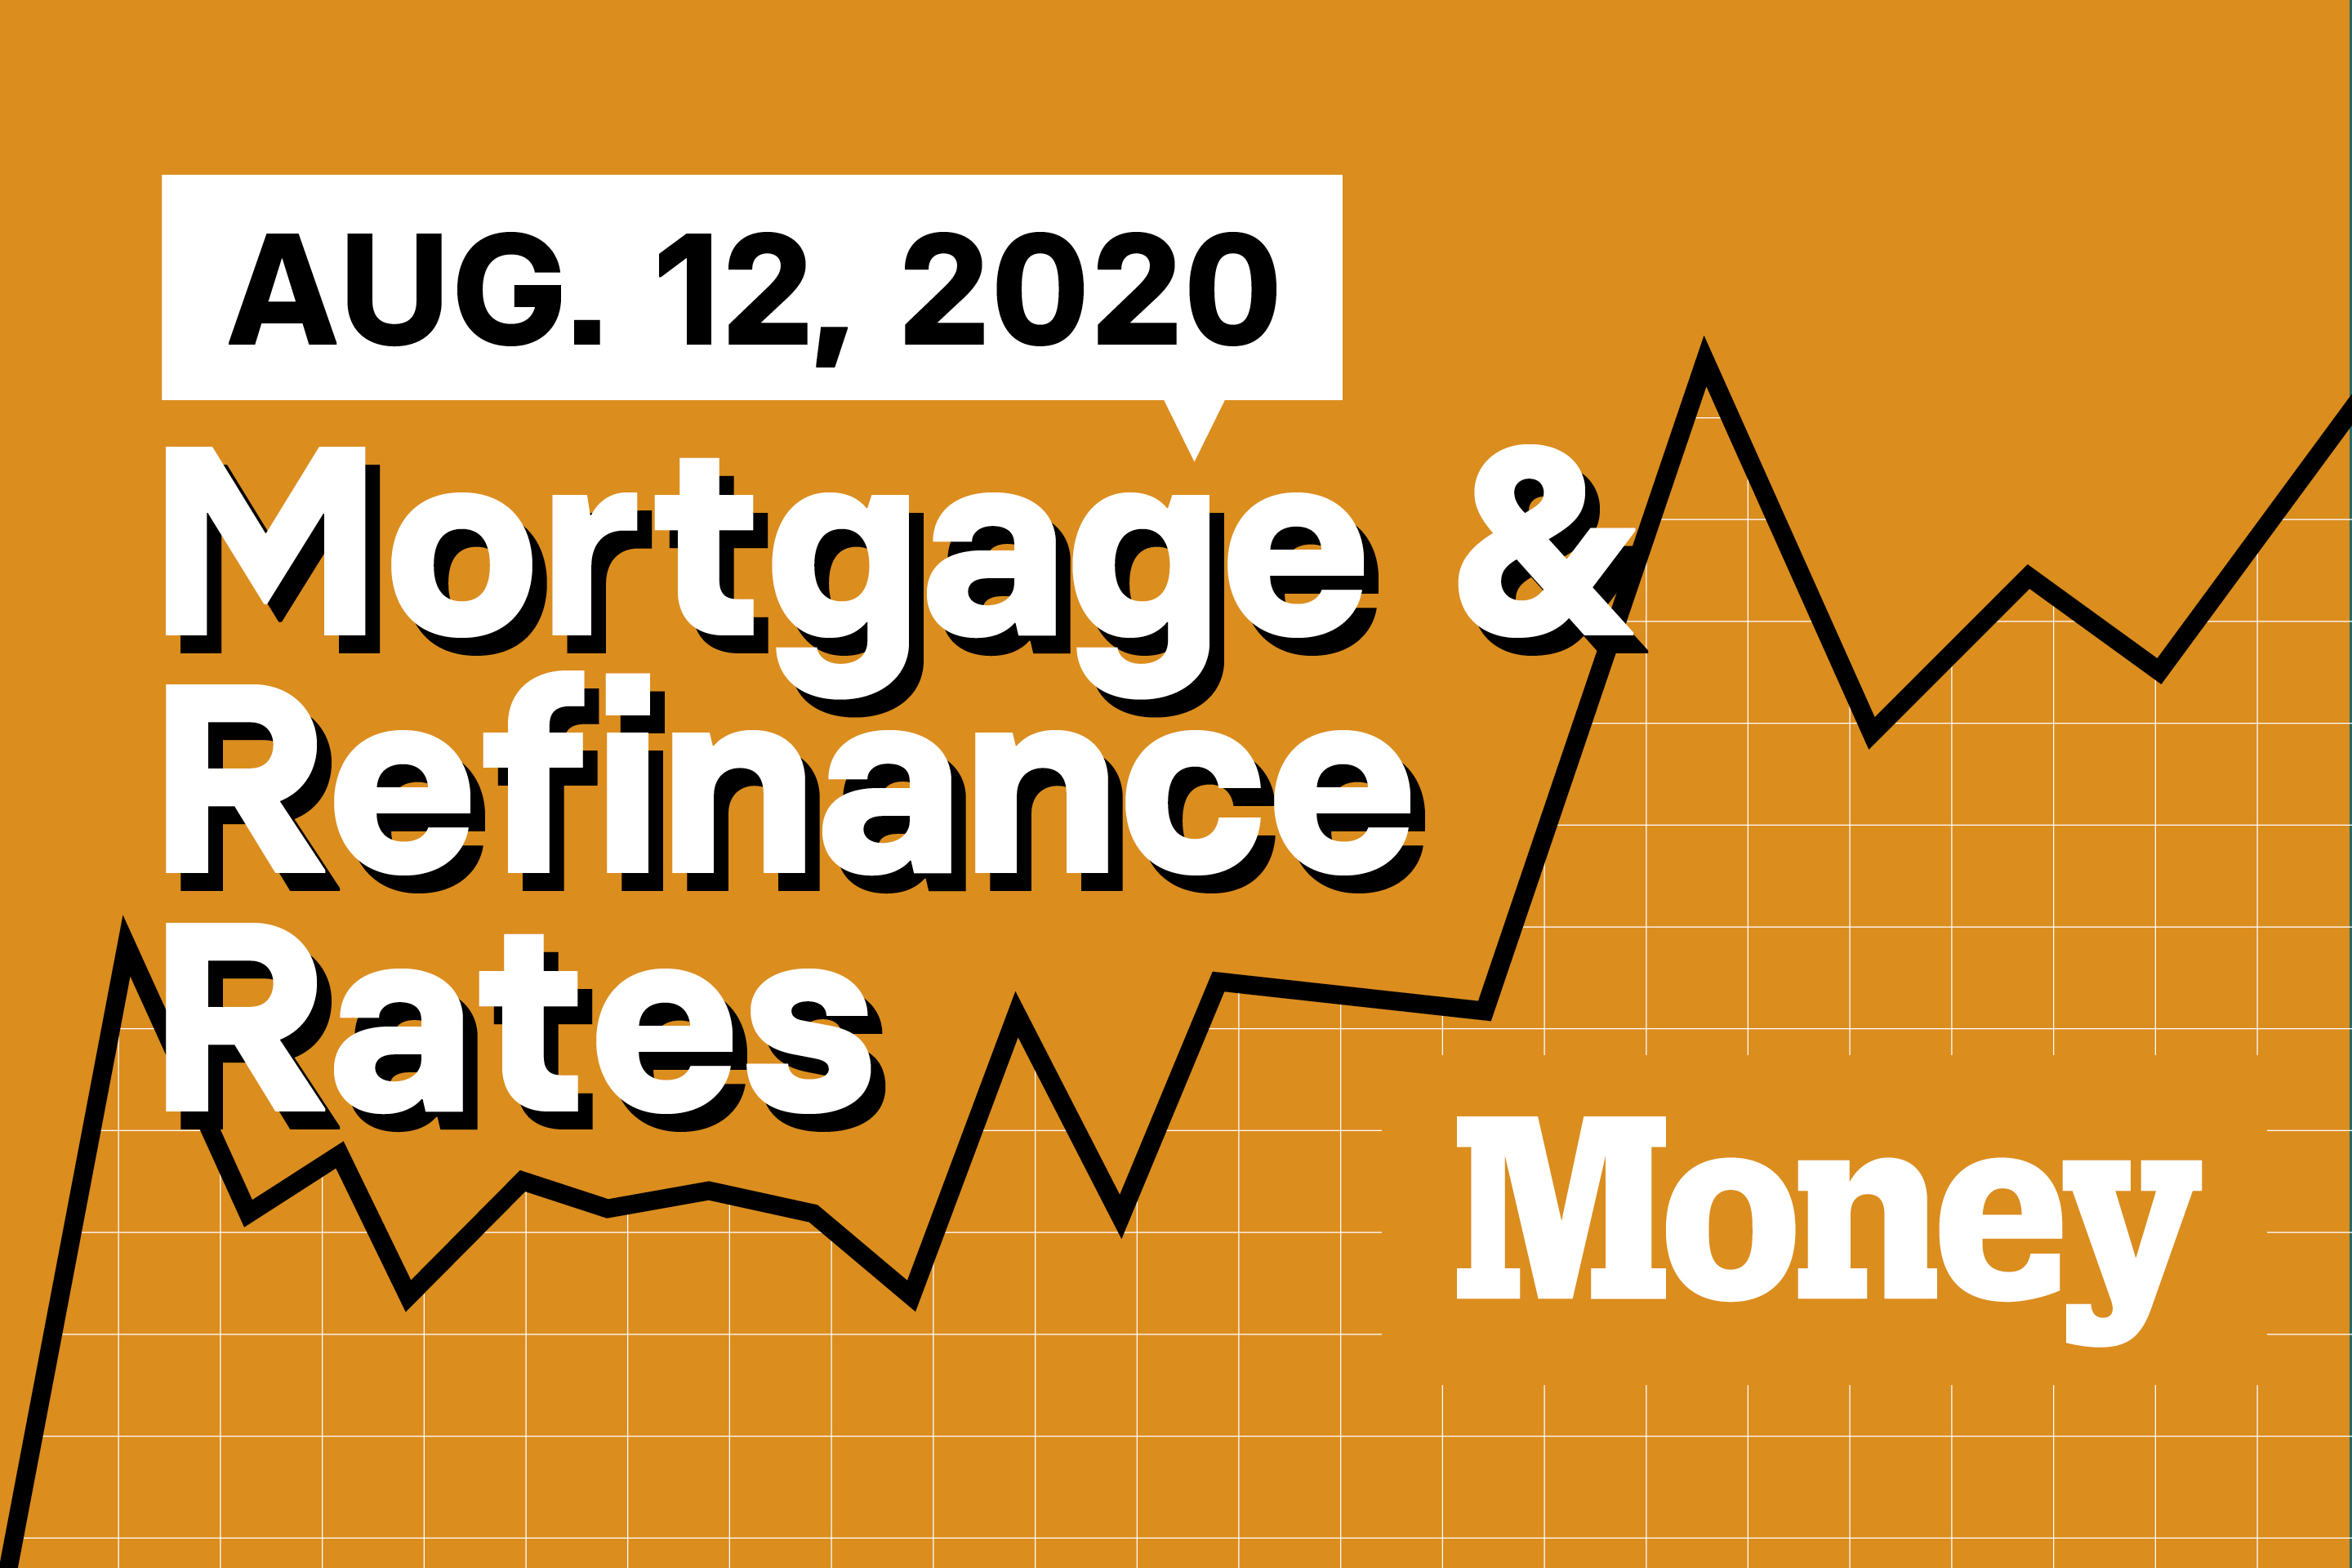 Here Are Today's Best Mortgage & Refinance Rates for August 12, 2020